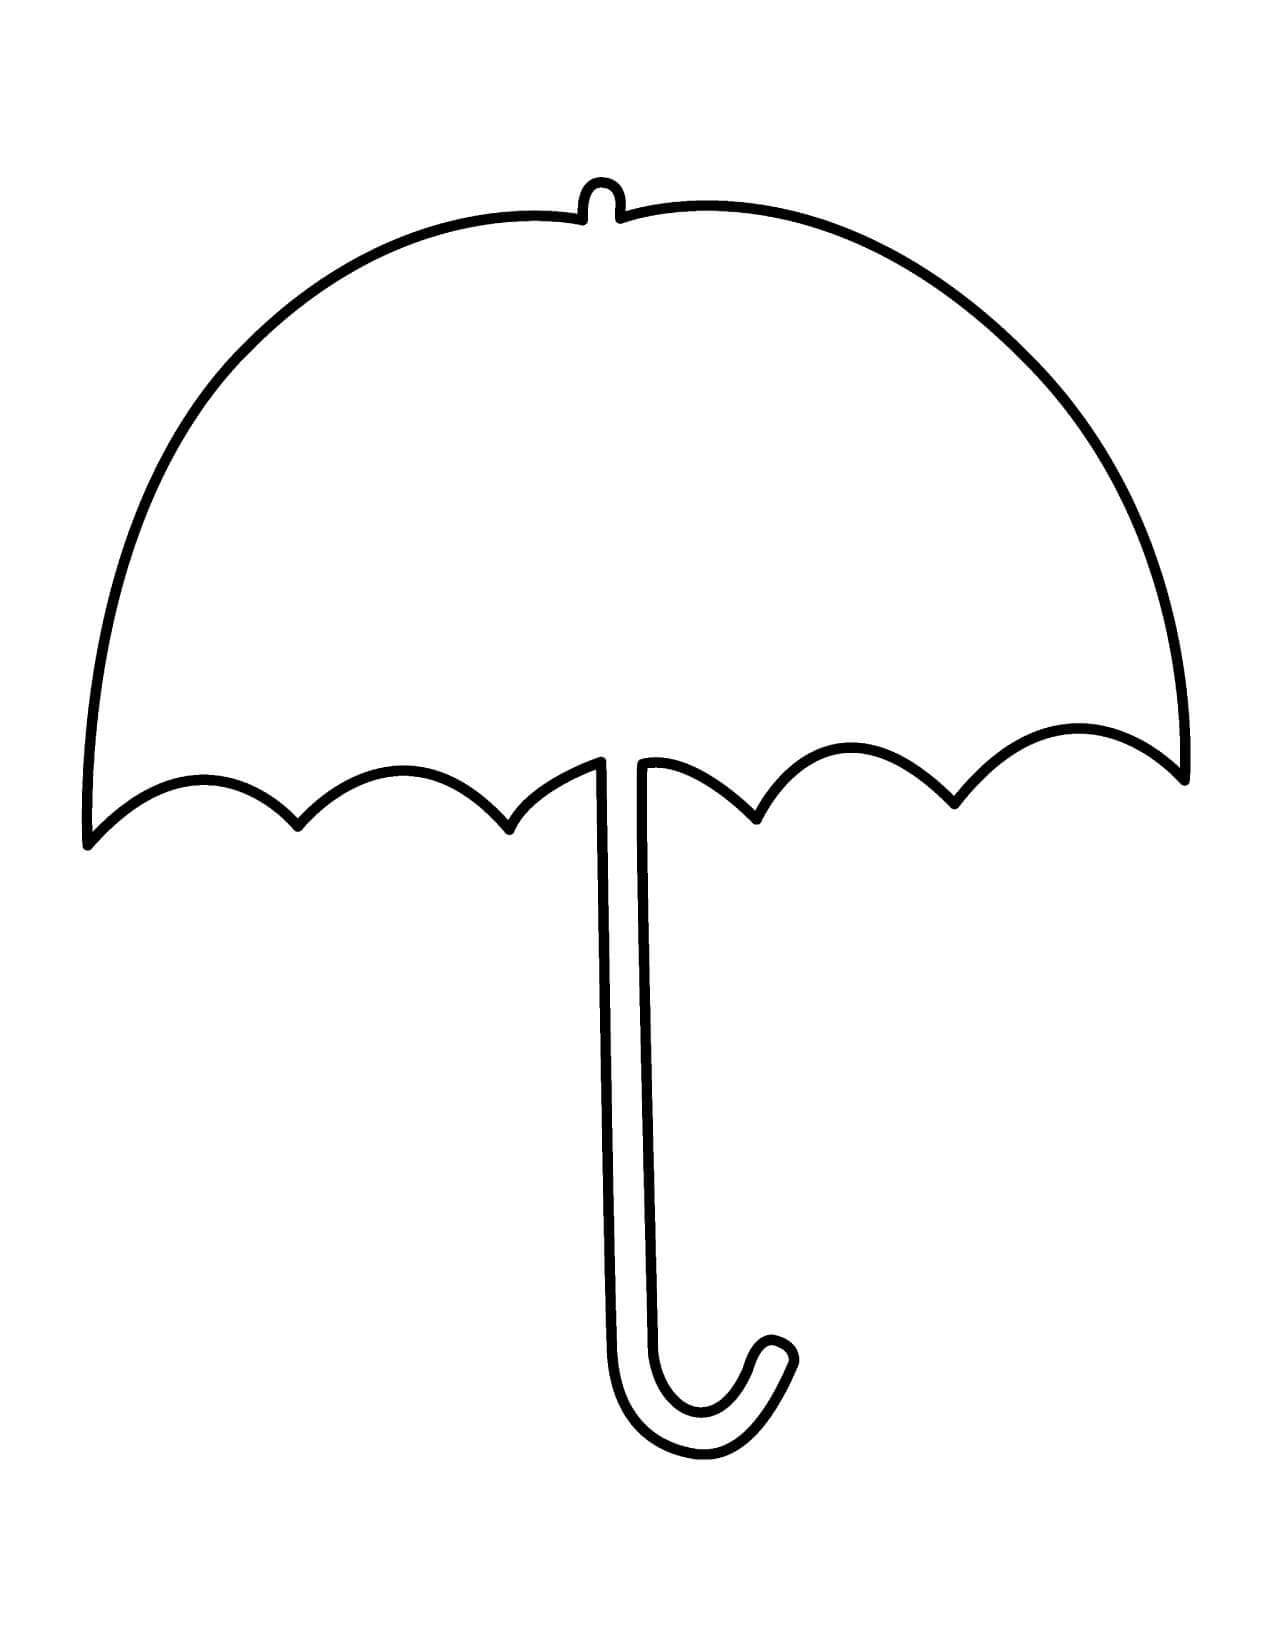 Closed Umbrella Outline Images Pictures – Becuo – Clip Art Inside Blank Umbrella Template